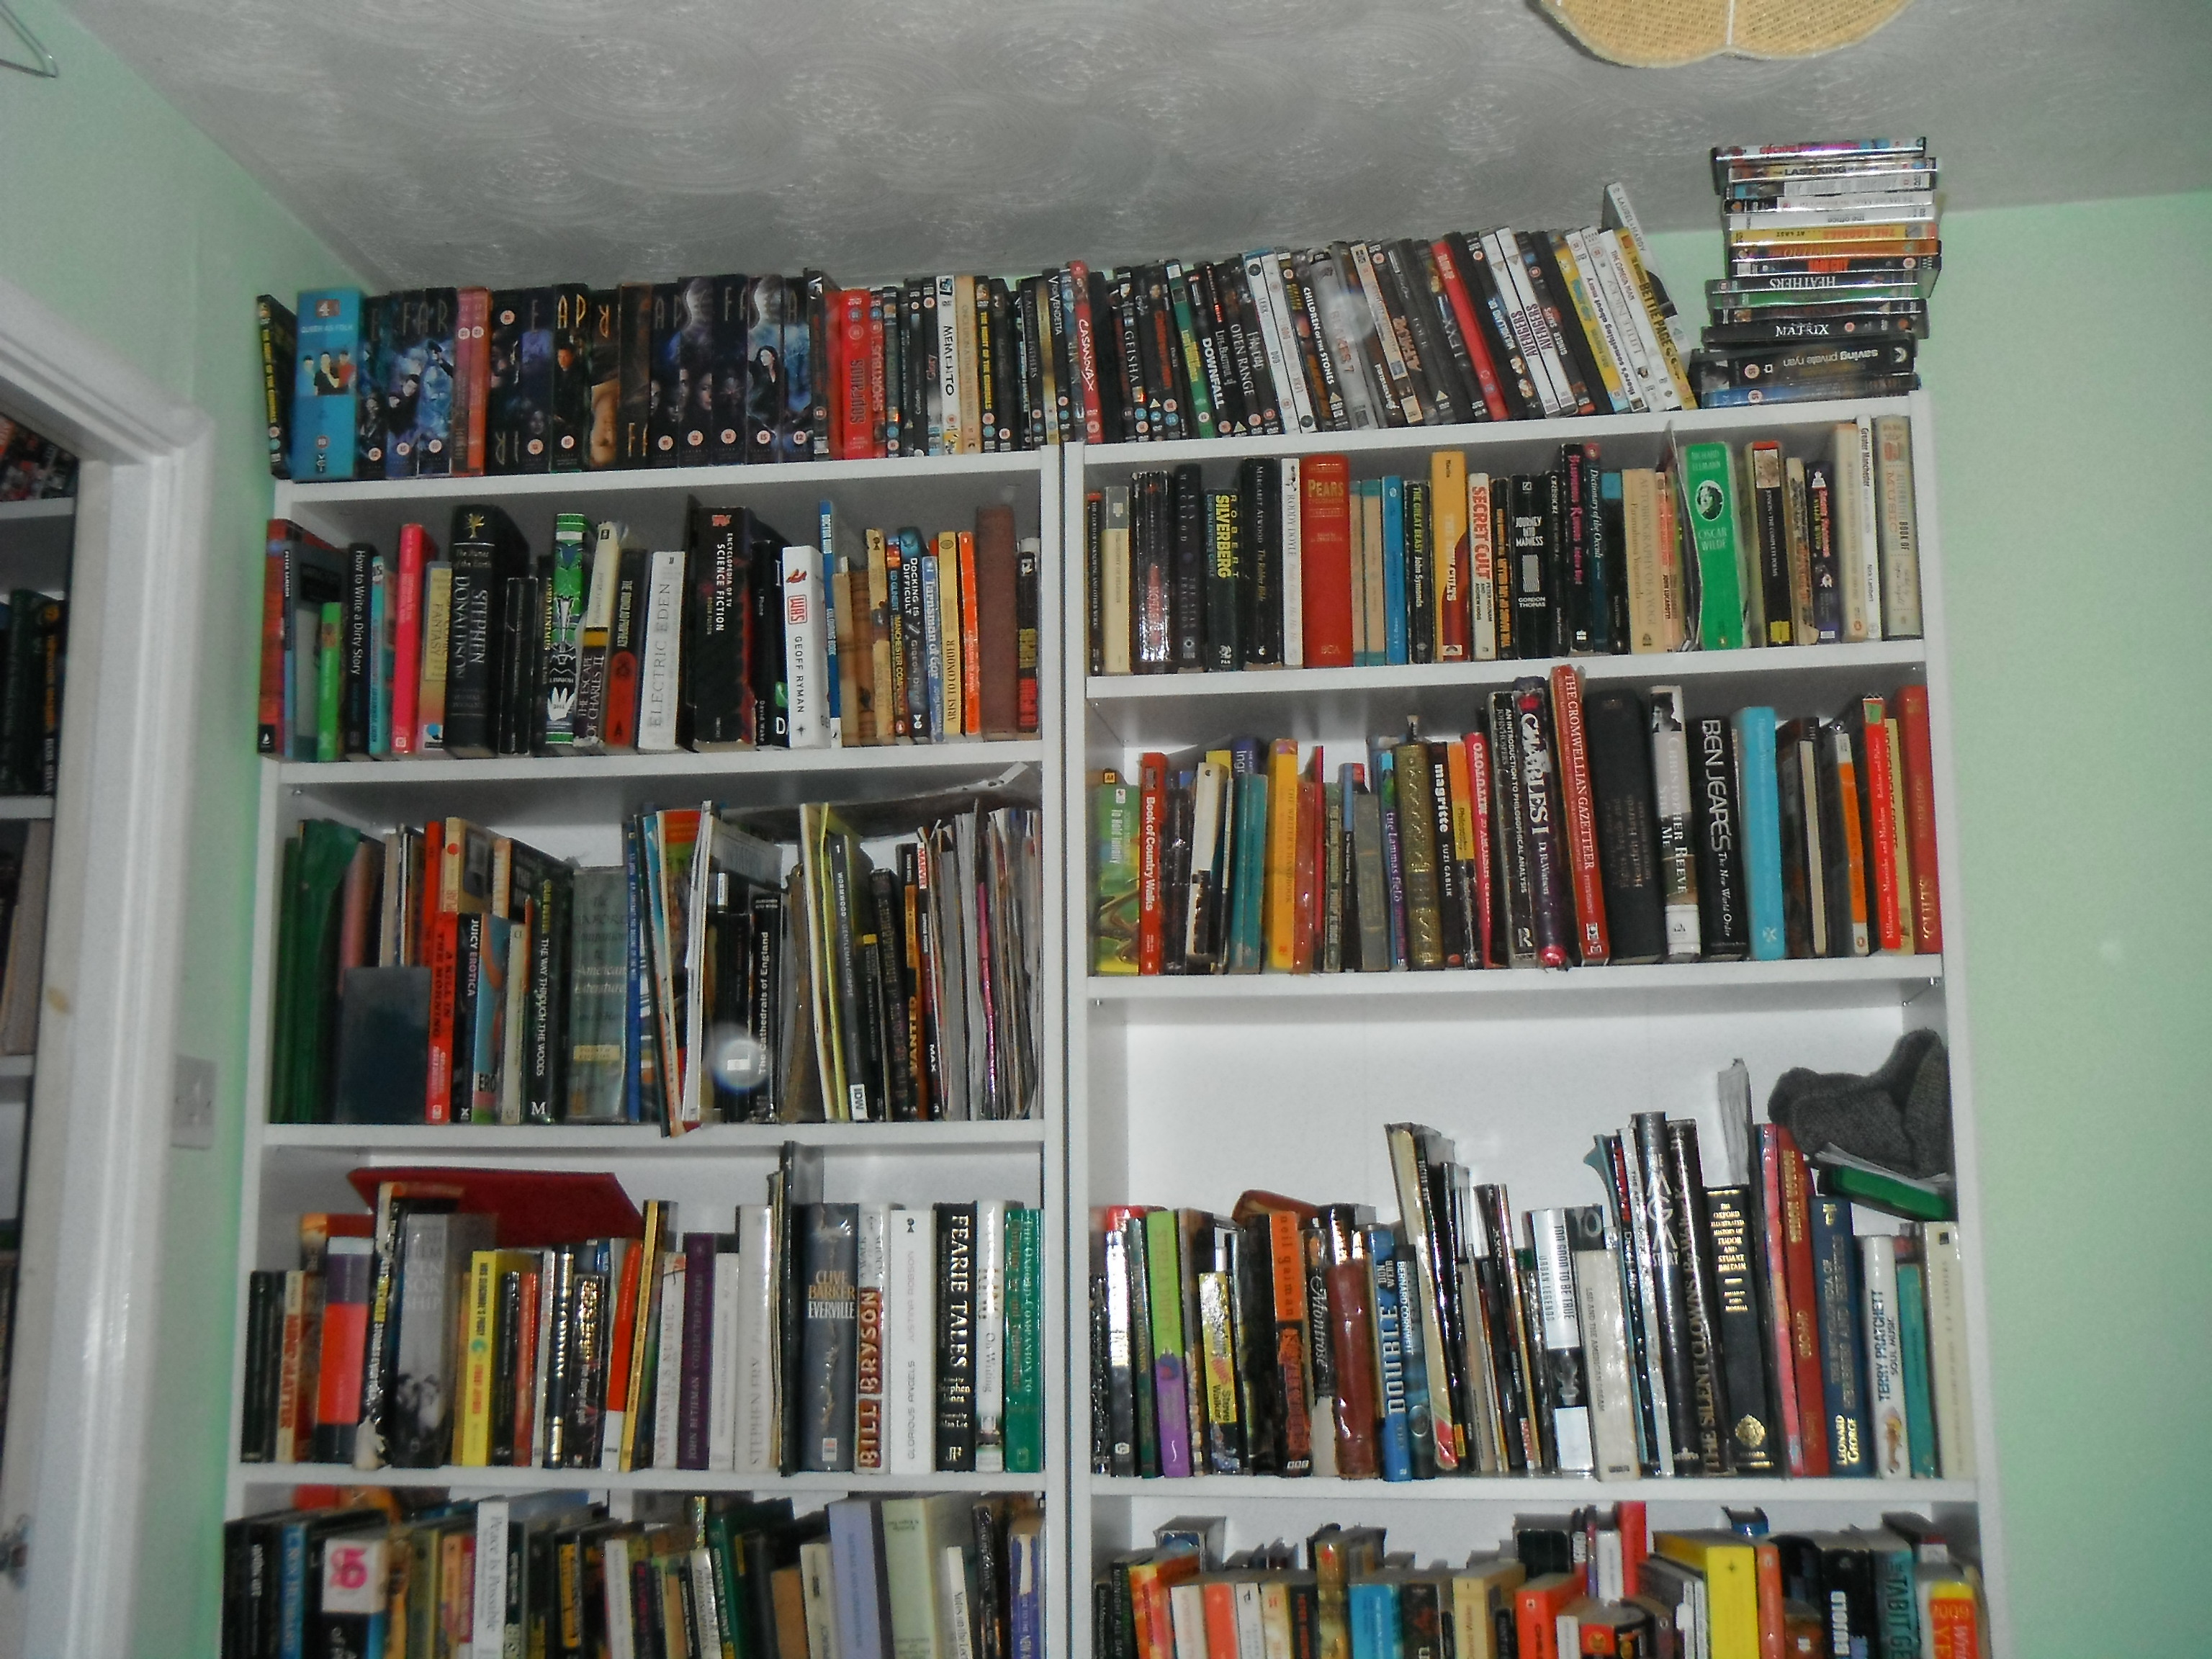 photo taken by me - my book cases